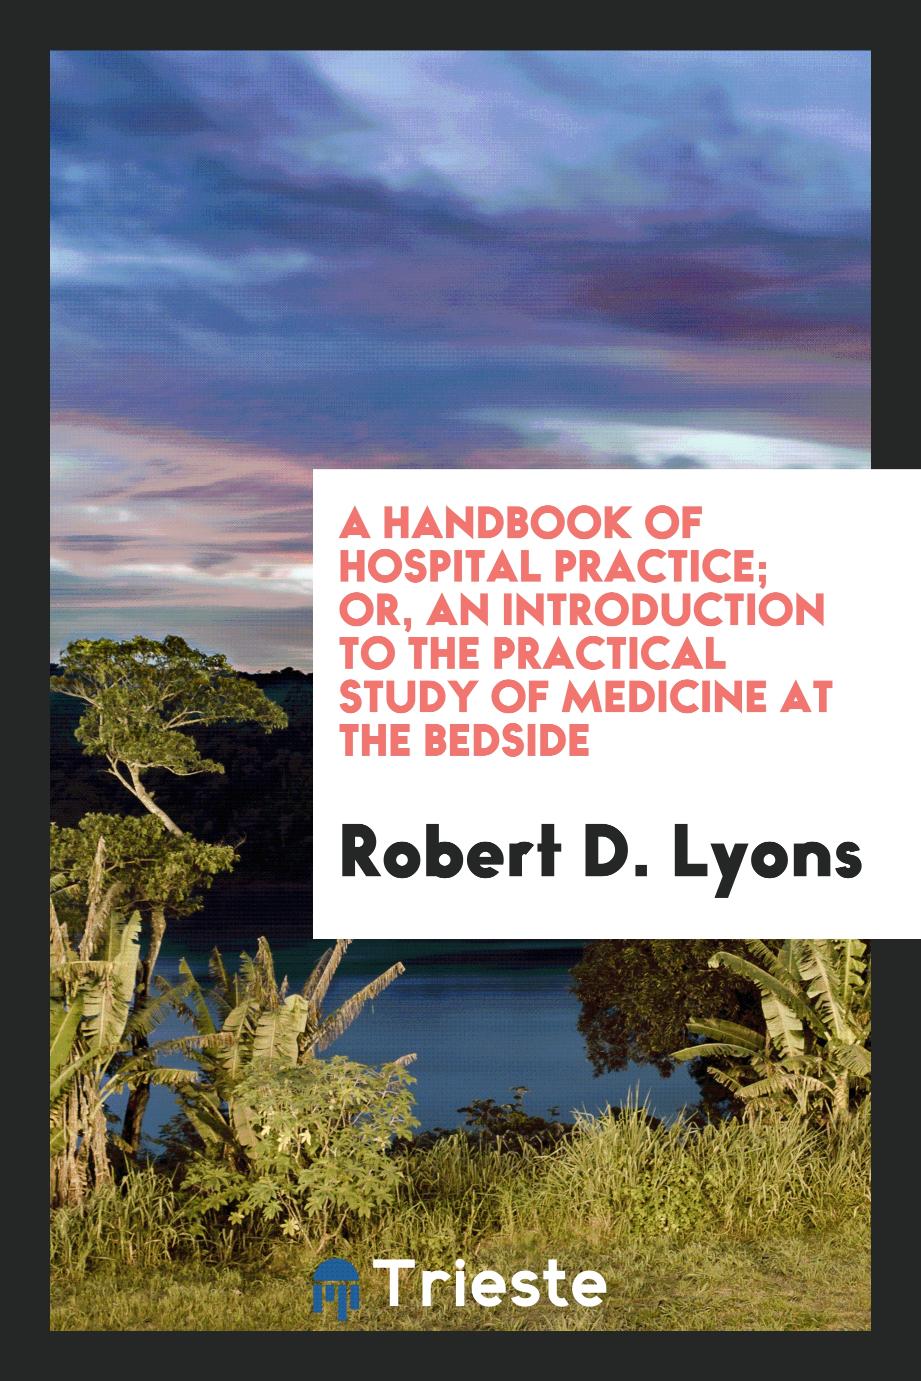 A Handbook of Hospital Practice; Or, an Introduction to the Practical Study of Medicine at the Bedside